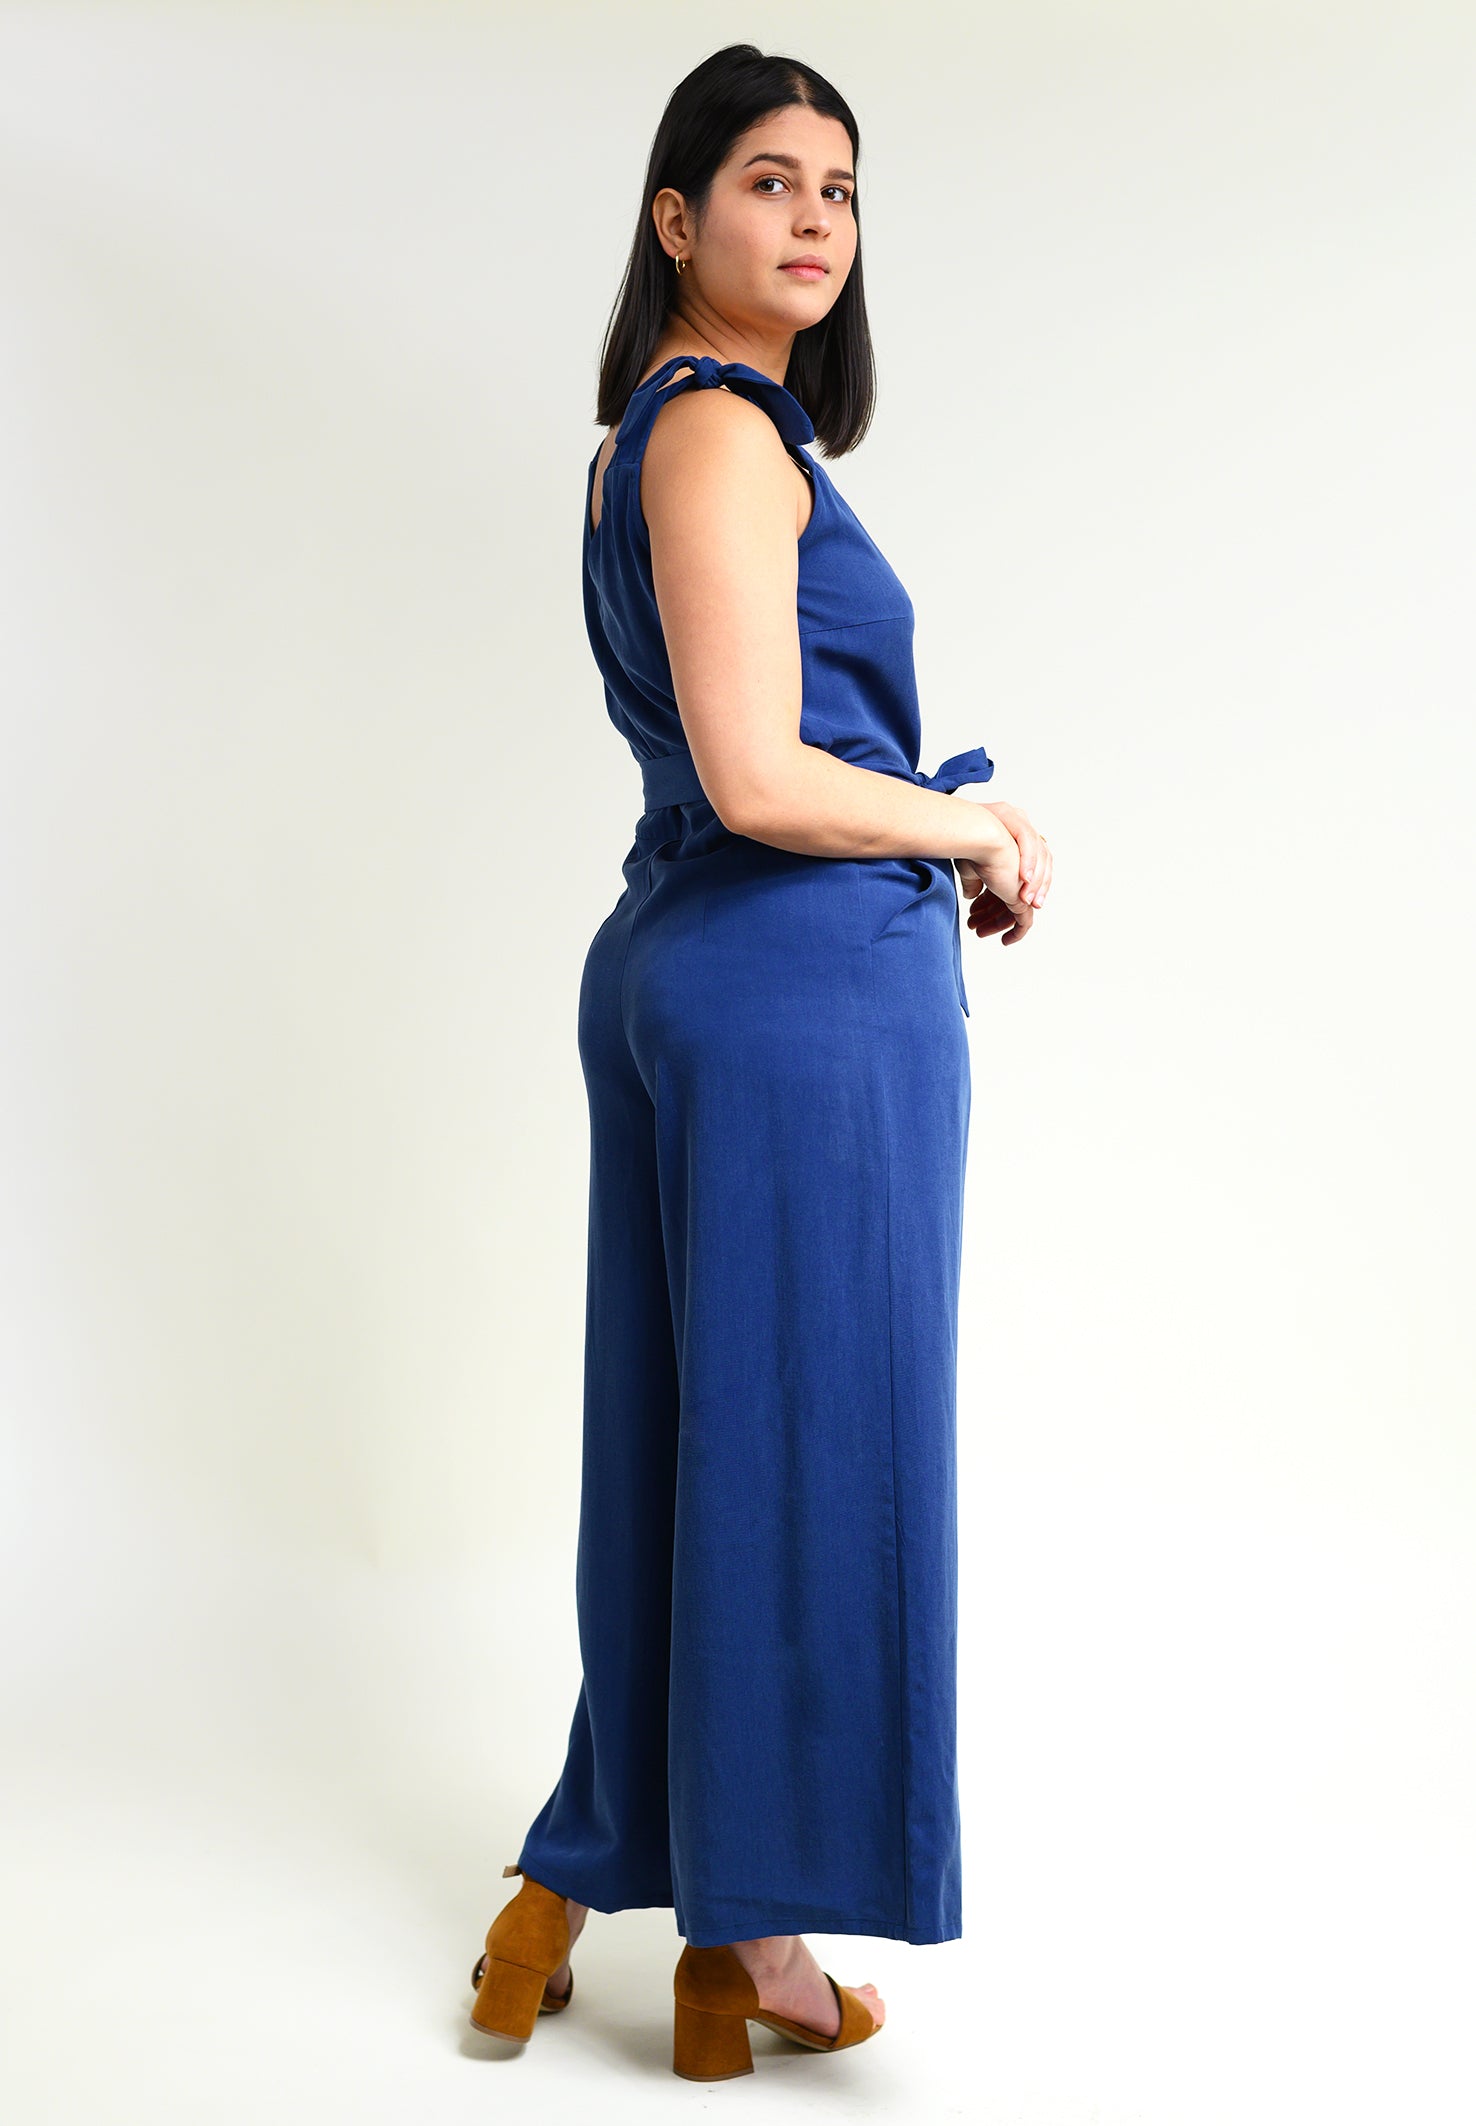 Jumpsuit FA-SAA in blue made of Tencel 